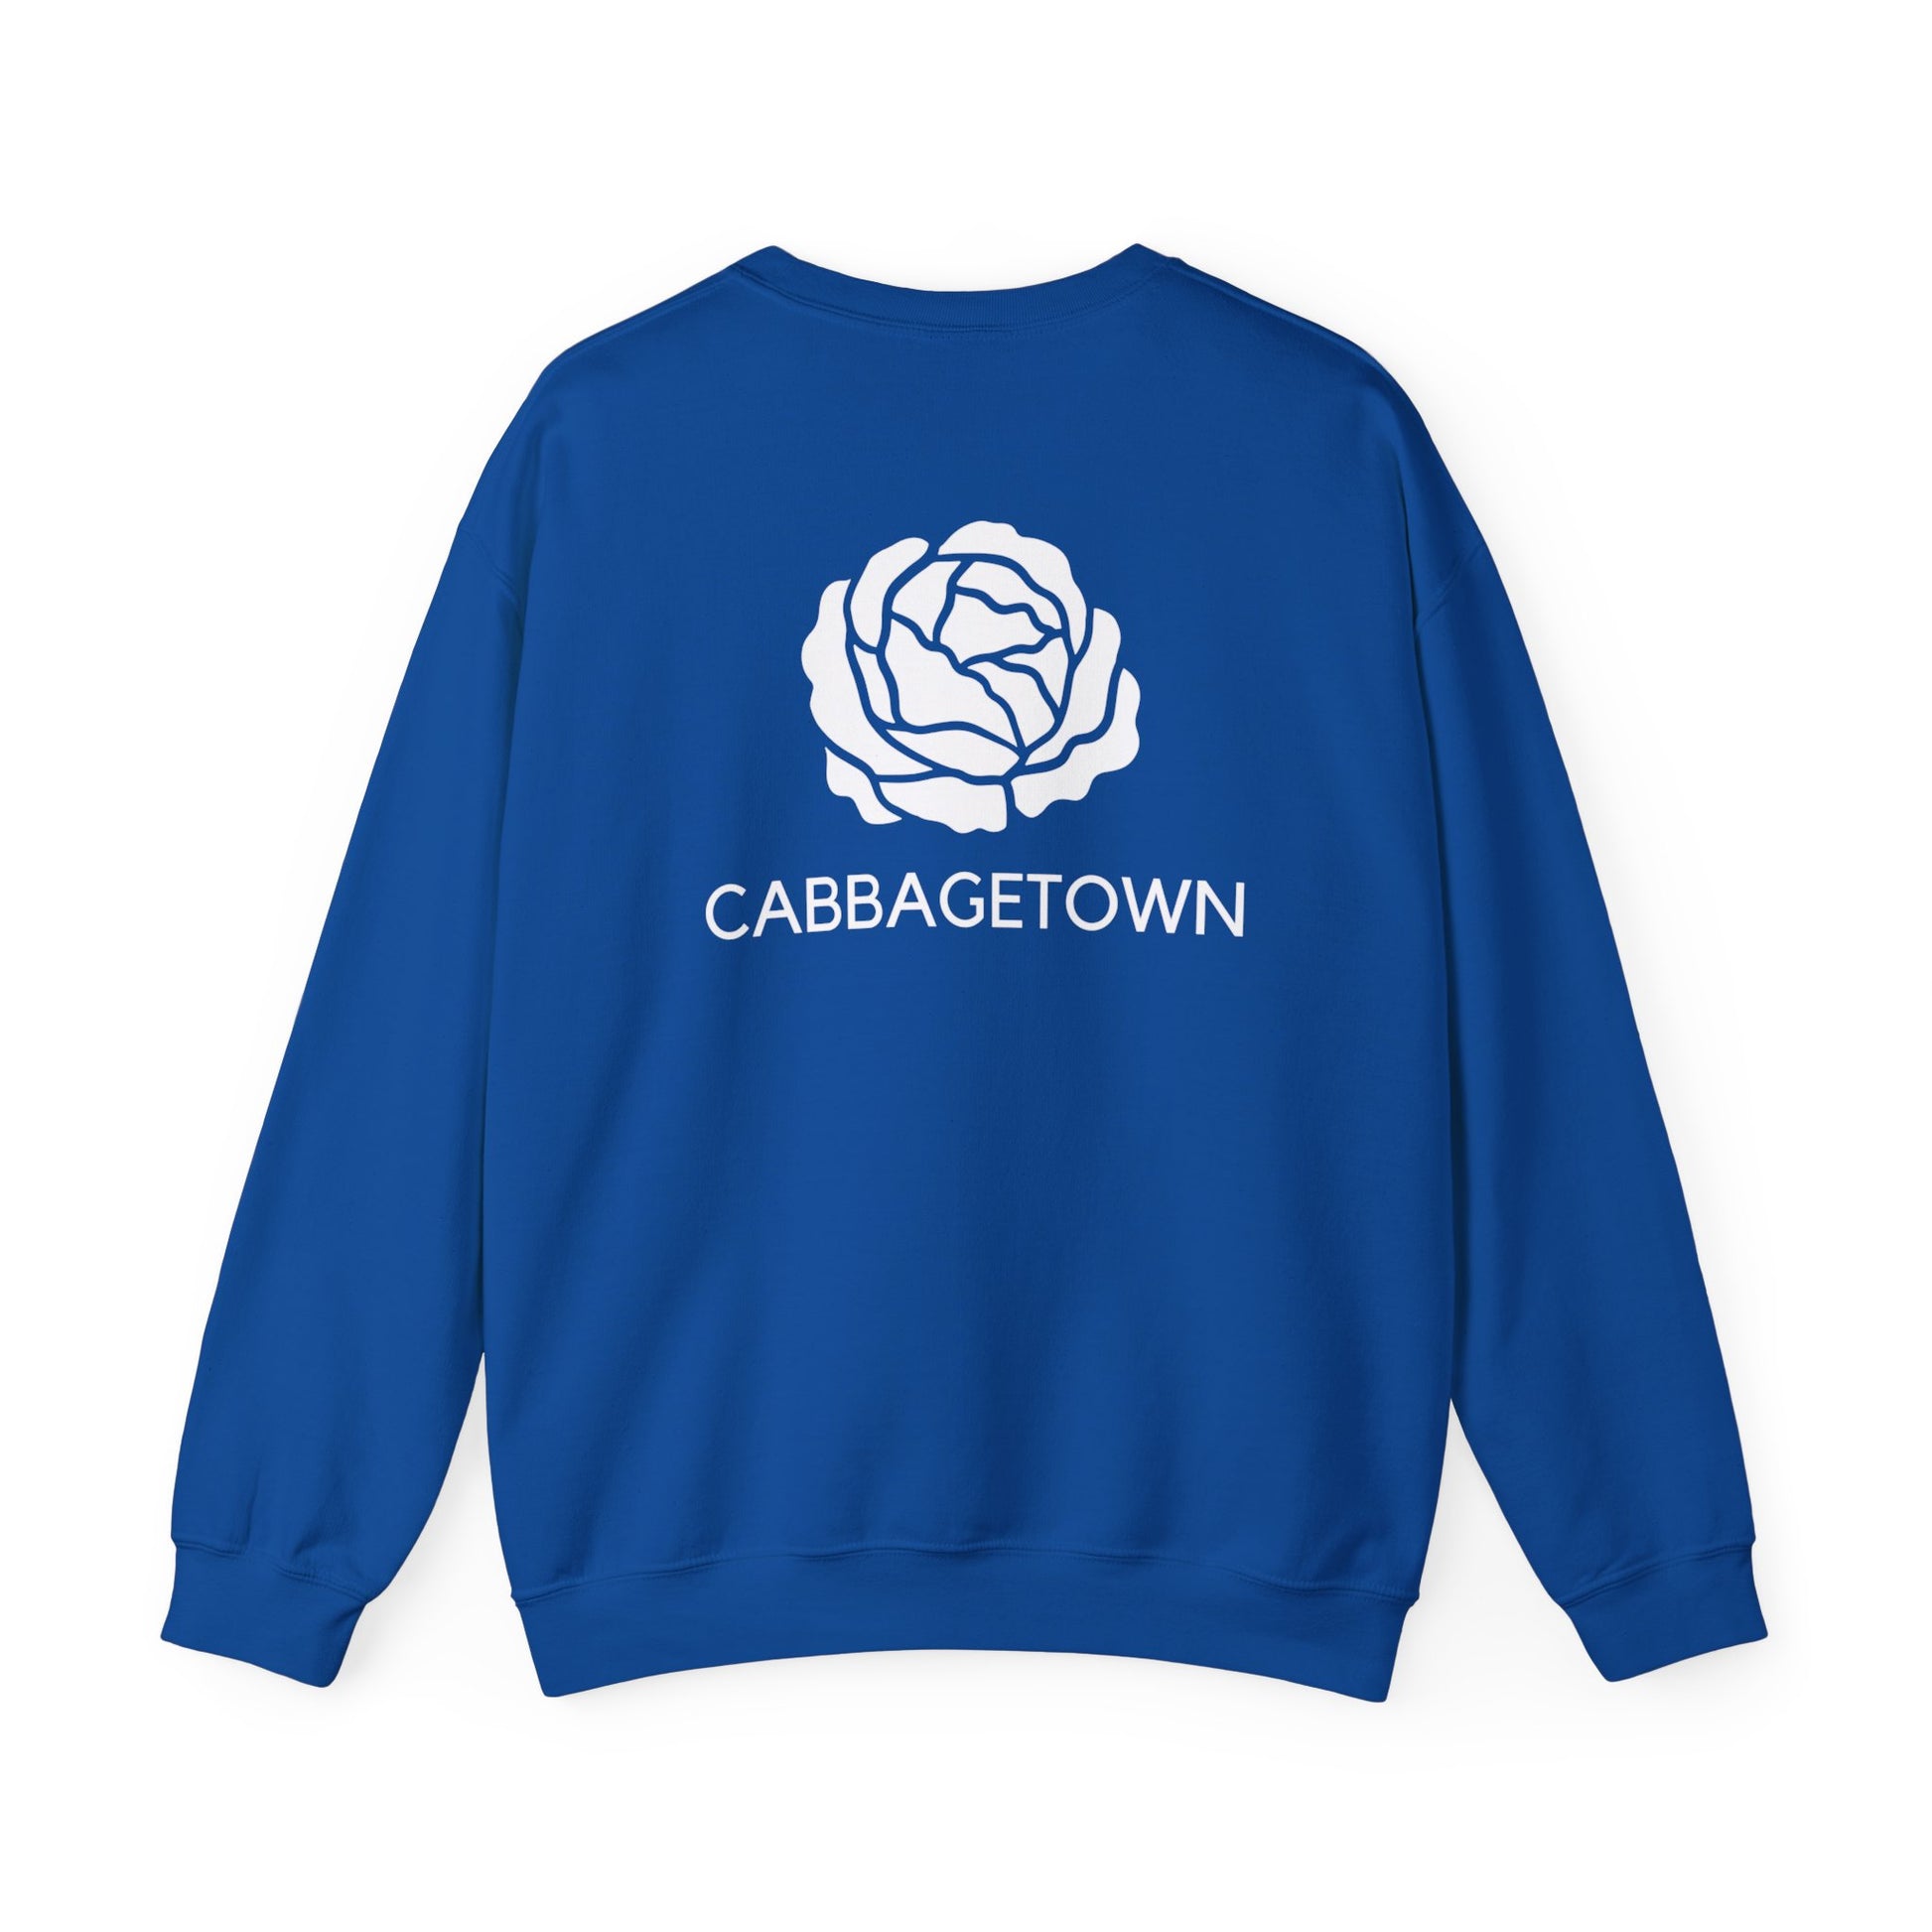 Blue Unisex Heavy Blend™ Crewneck Monochrome Logo and Cabbagetown Toronto Sweatshirt featuring a white graphic of a rose with the word "CABBAGETOWN TORONTO" underneath, displayed on a plain white background by Printify.